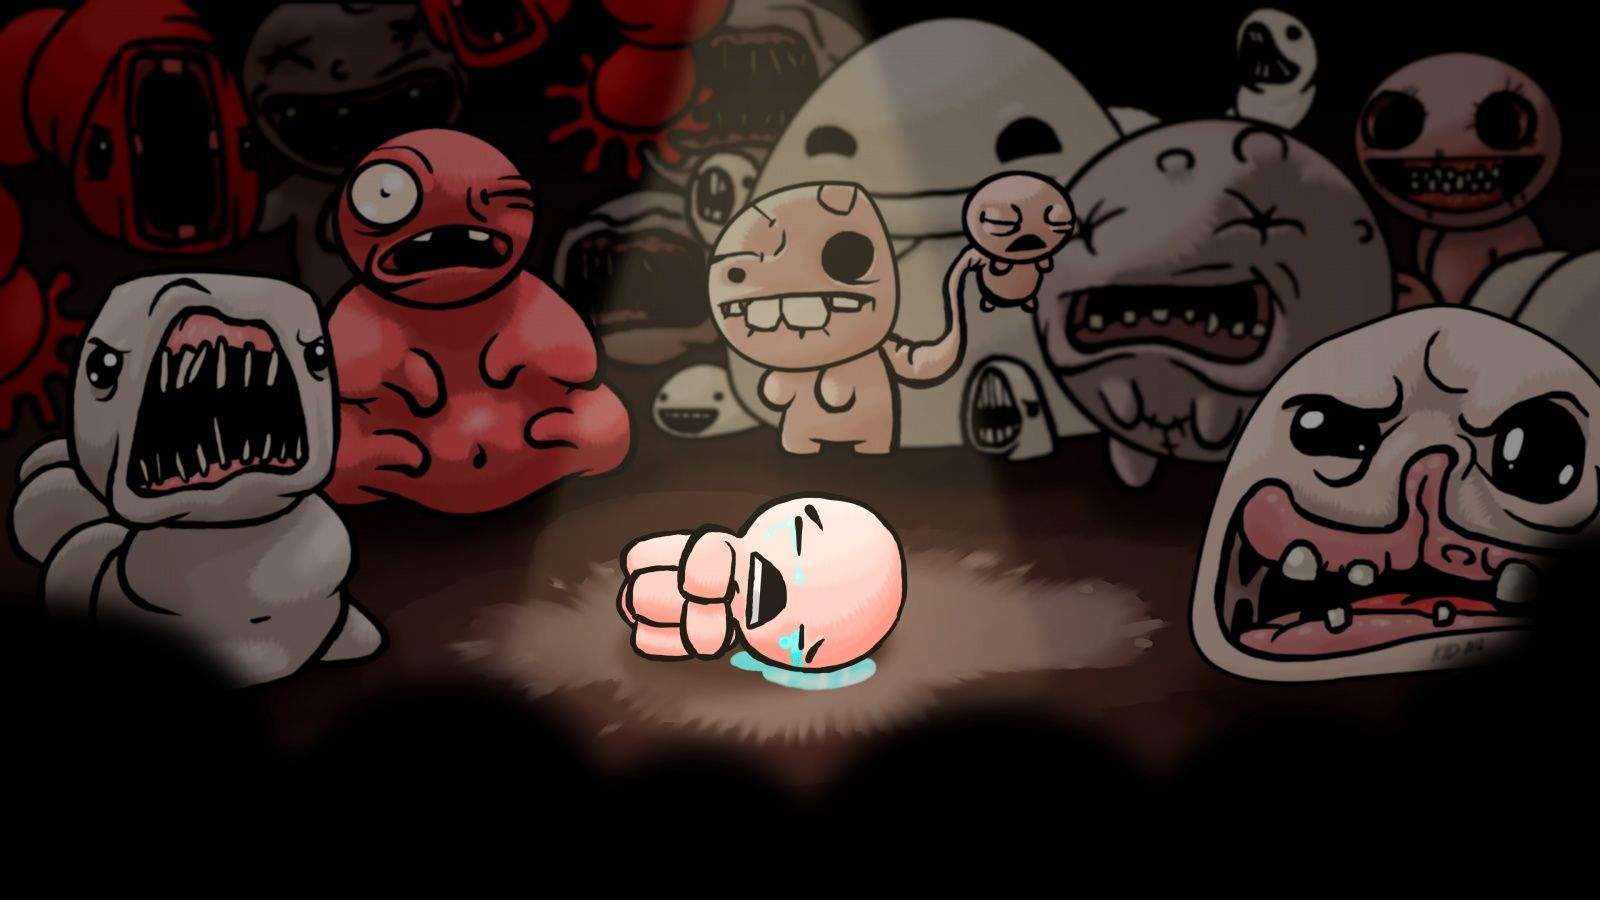 the_binding_of_isaac_wallpaper_by_thekid221-d5ovlnt